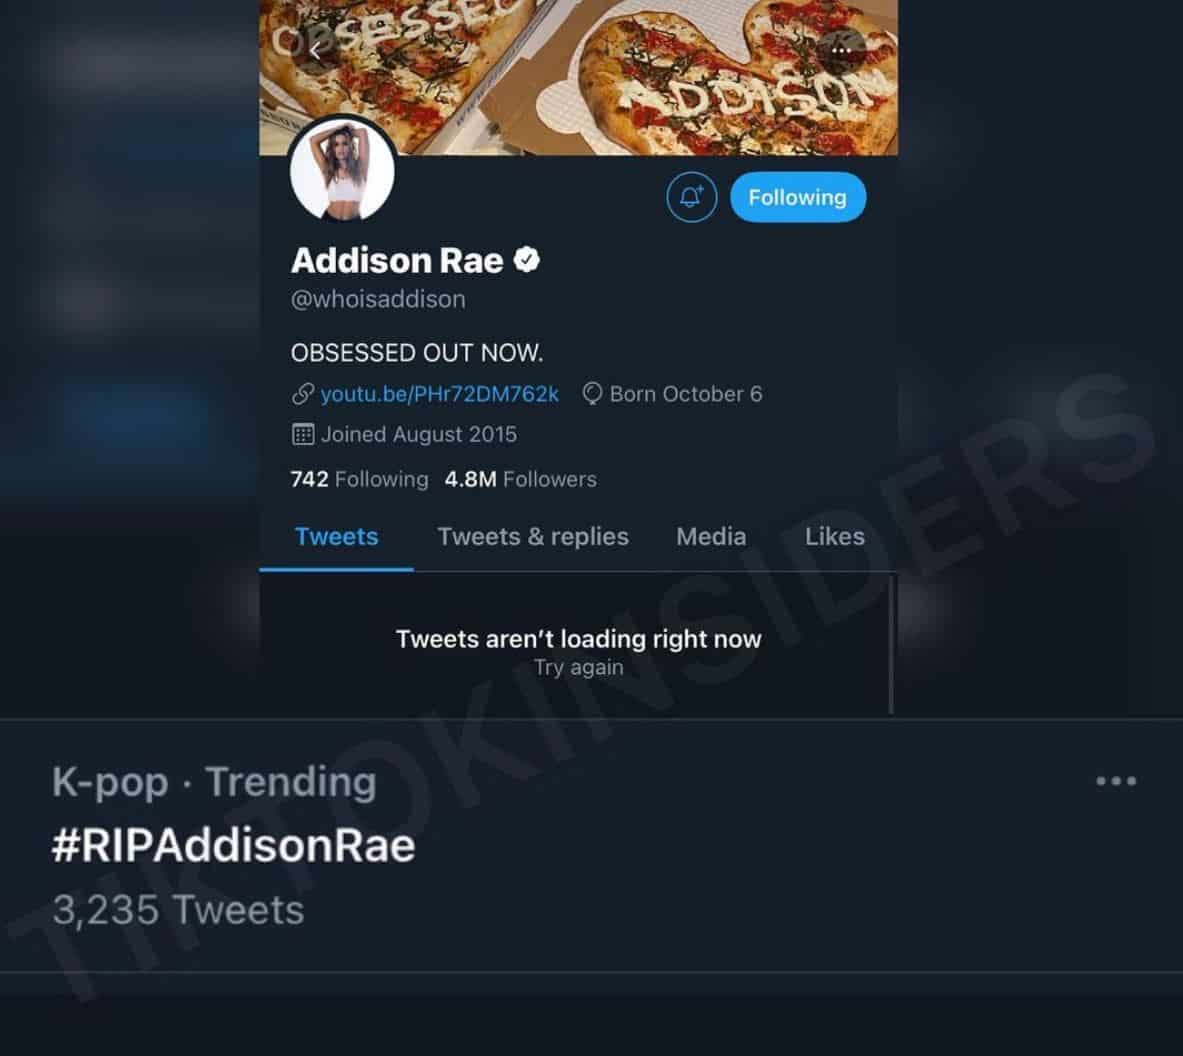 RIP Addison Rae hashtag spreads on Twitter